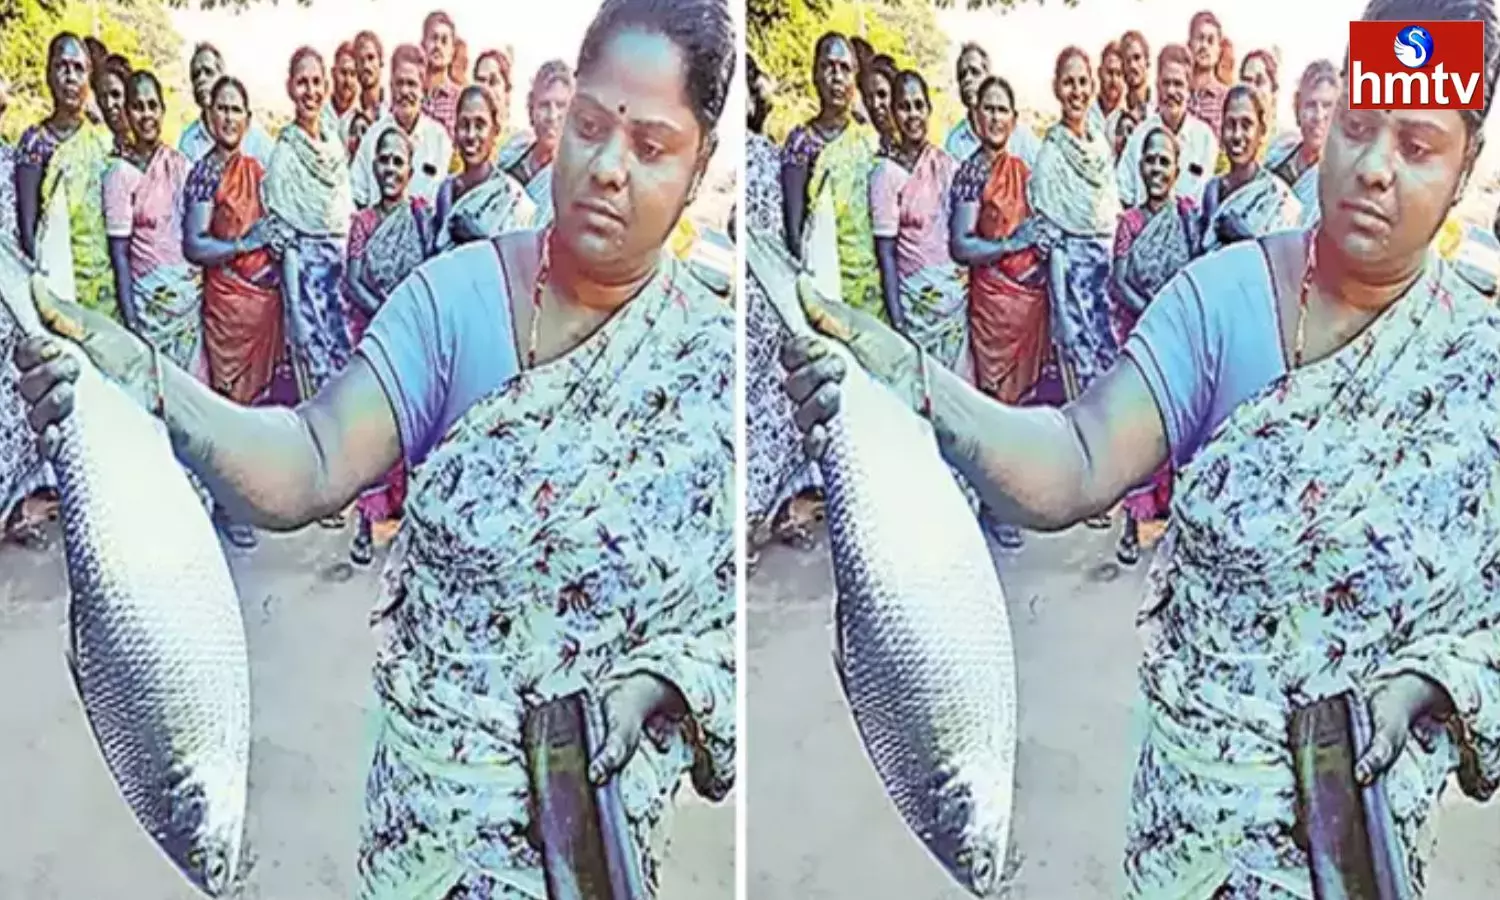 2 Kgs Pulasa Fish Sold For Rs 26 Thousand In The Auction At Yanam Market